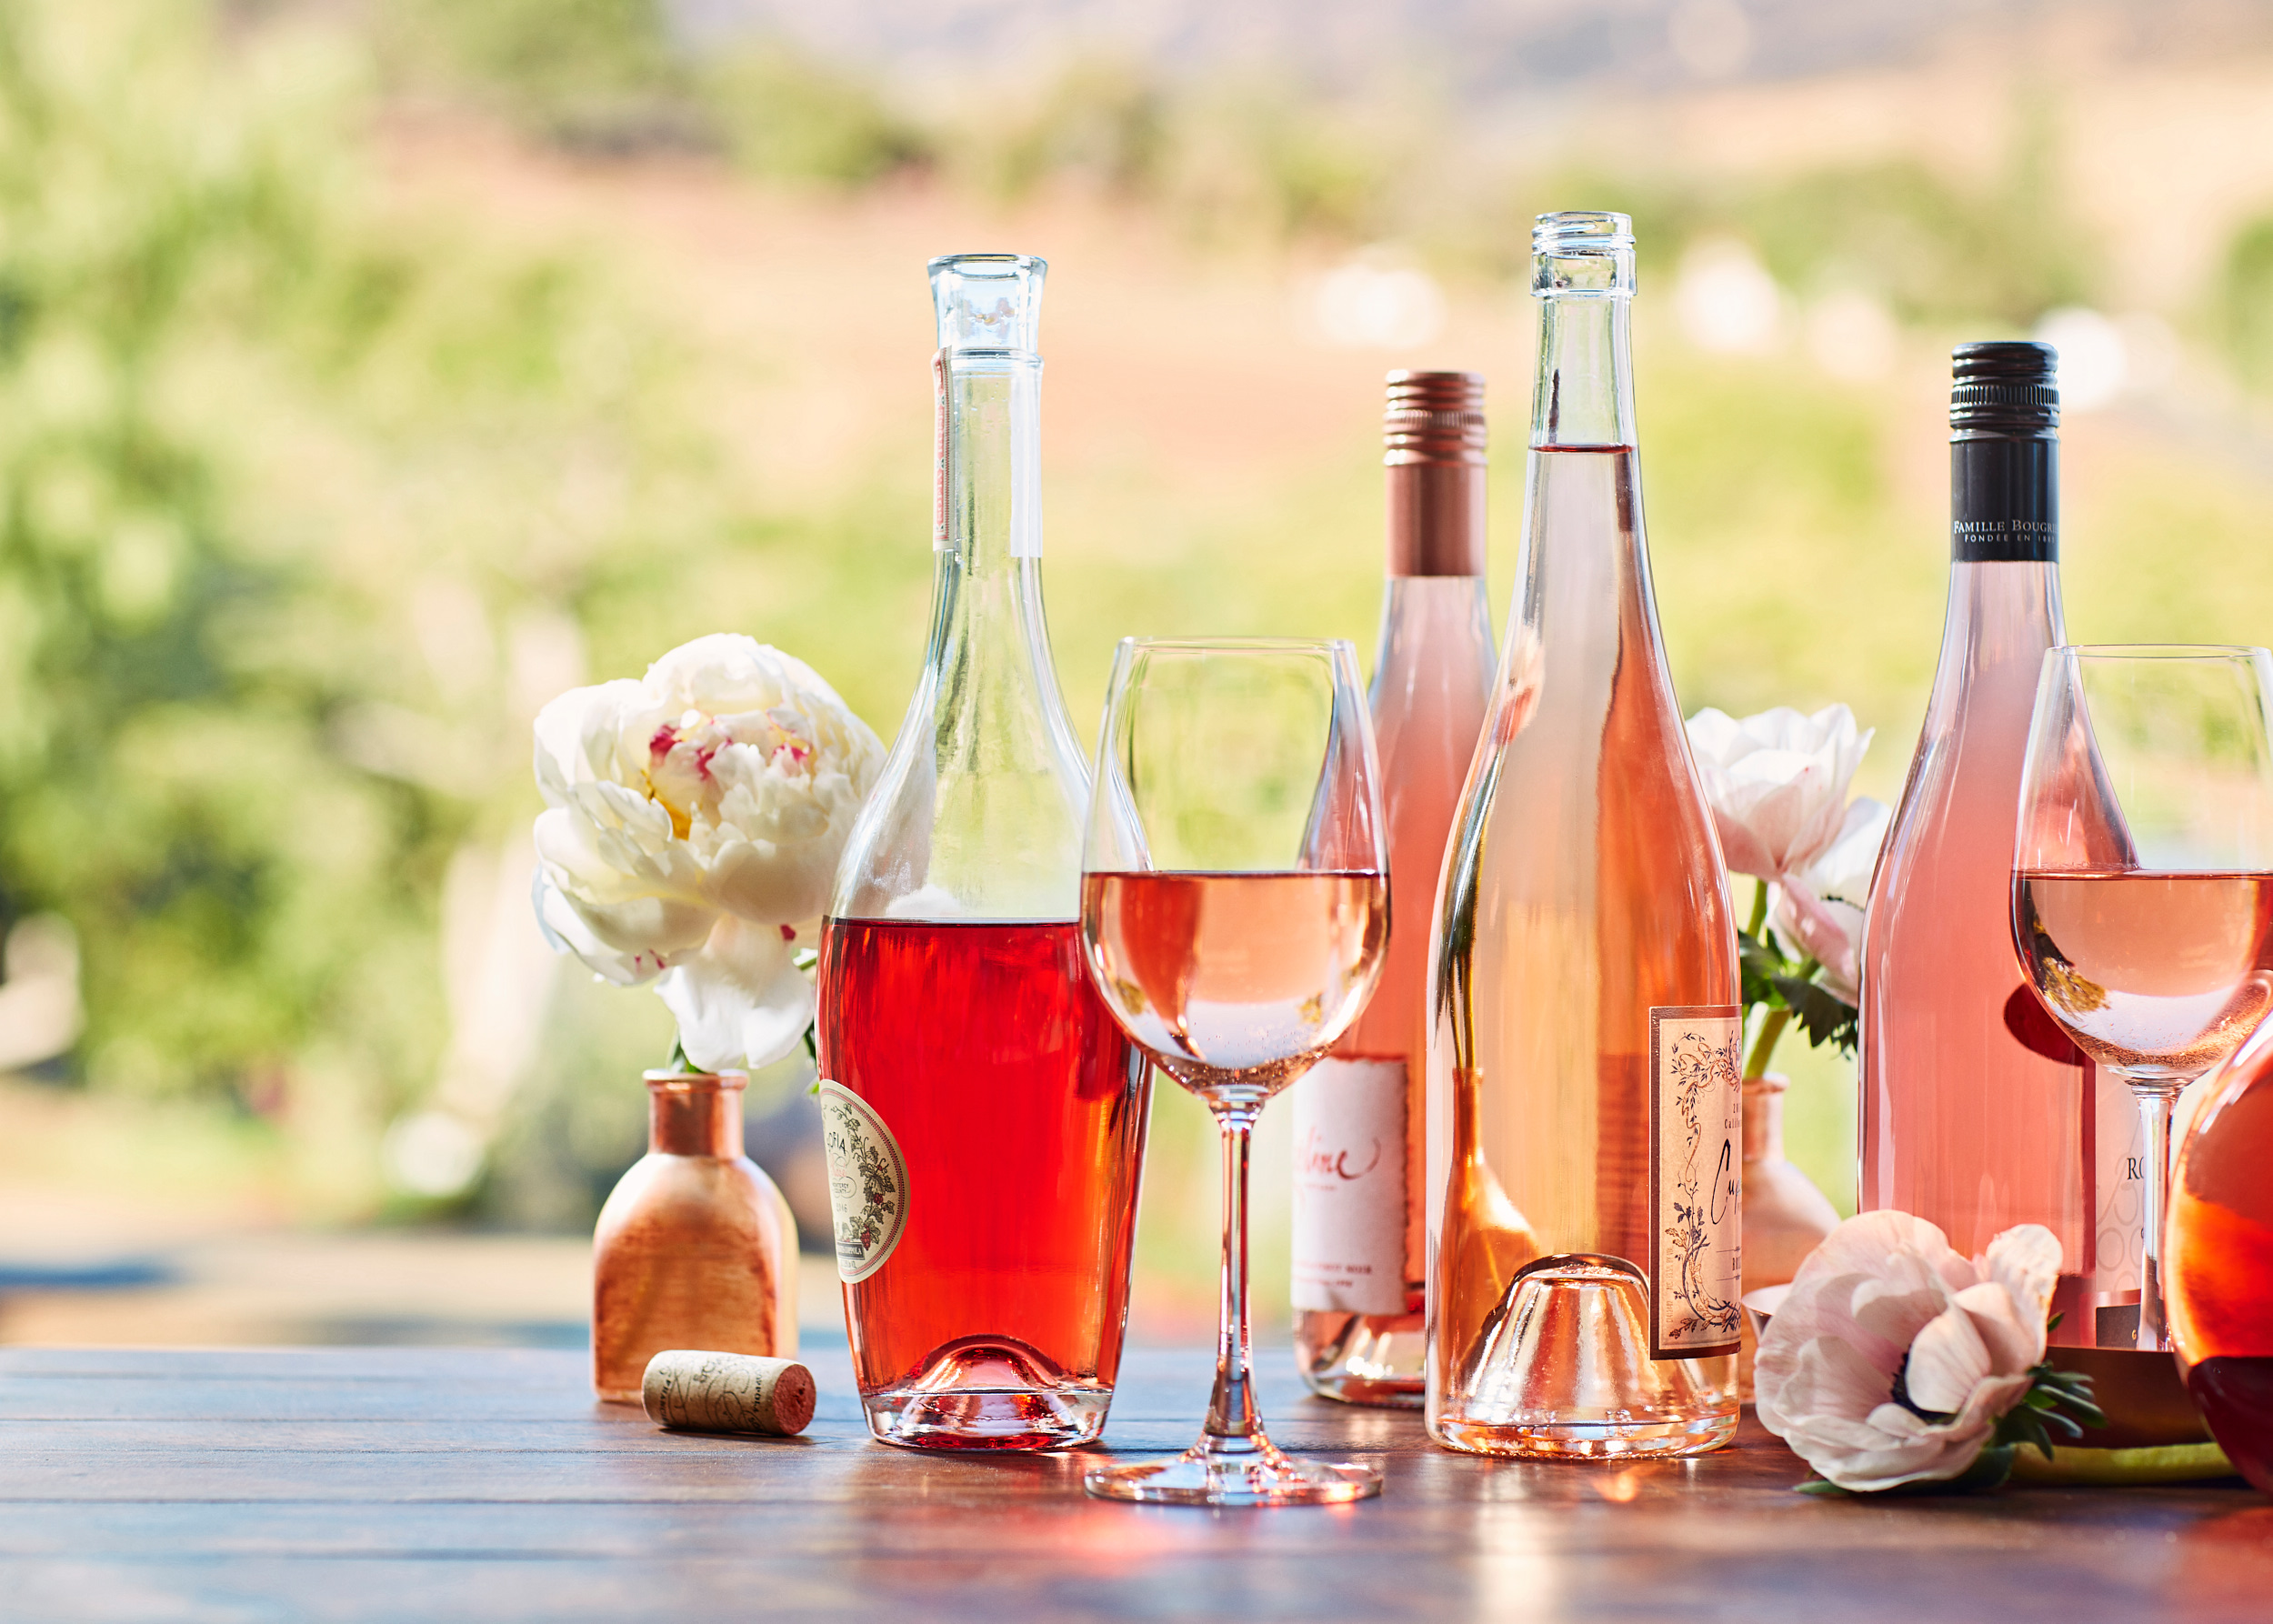 A collection of various Rosé wine bottles in an outdoor setting in the spring.